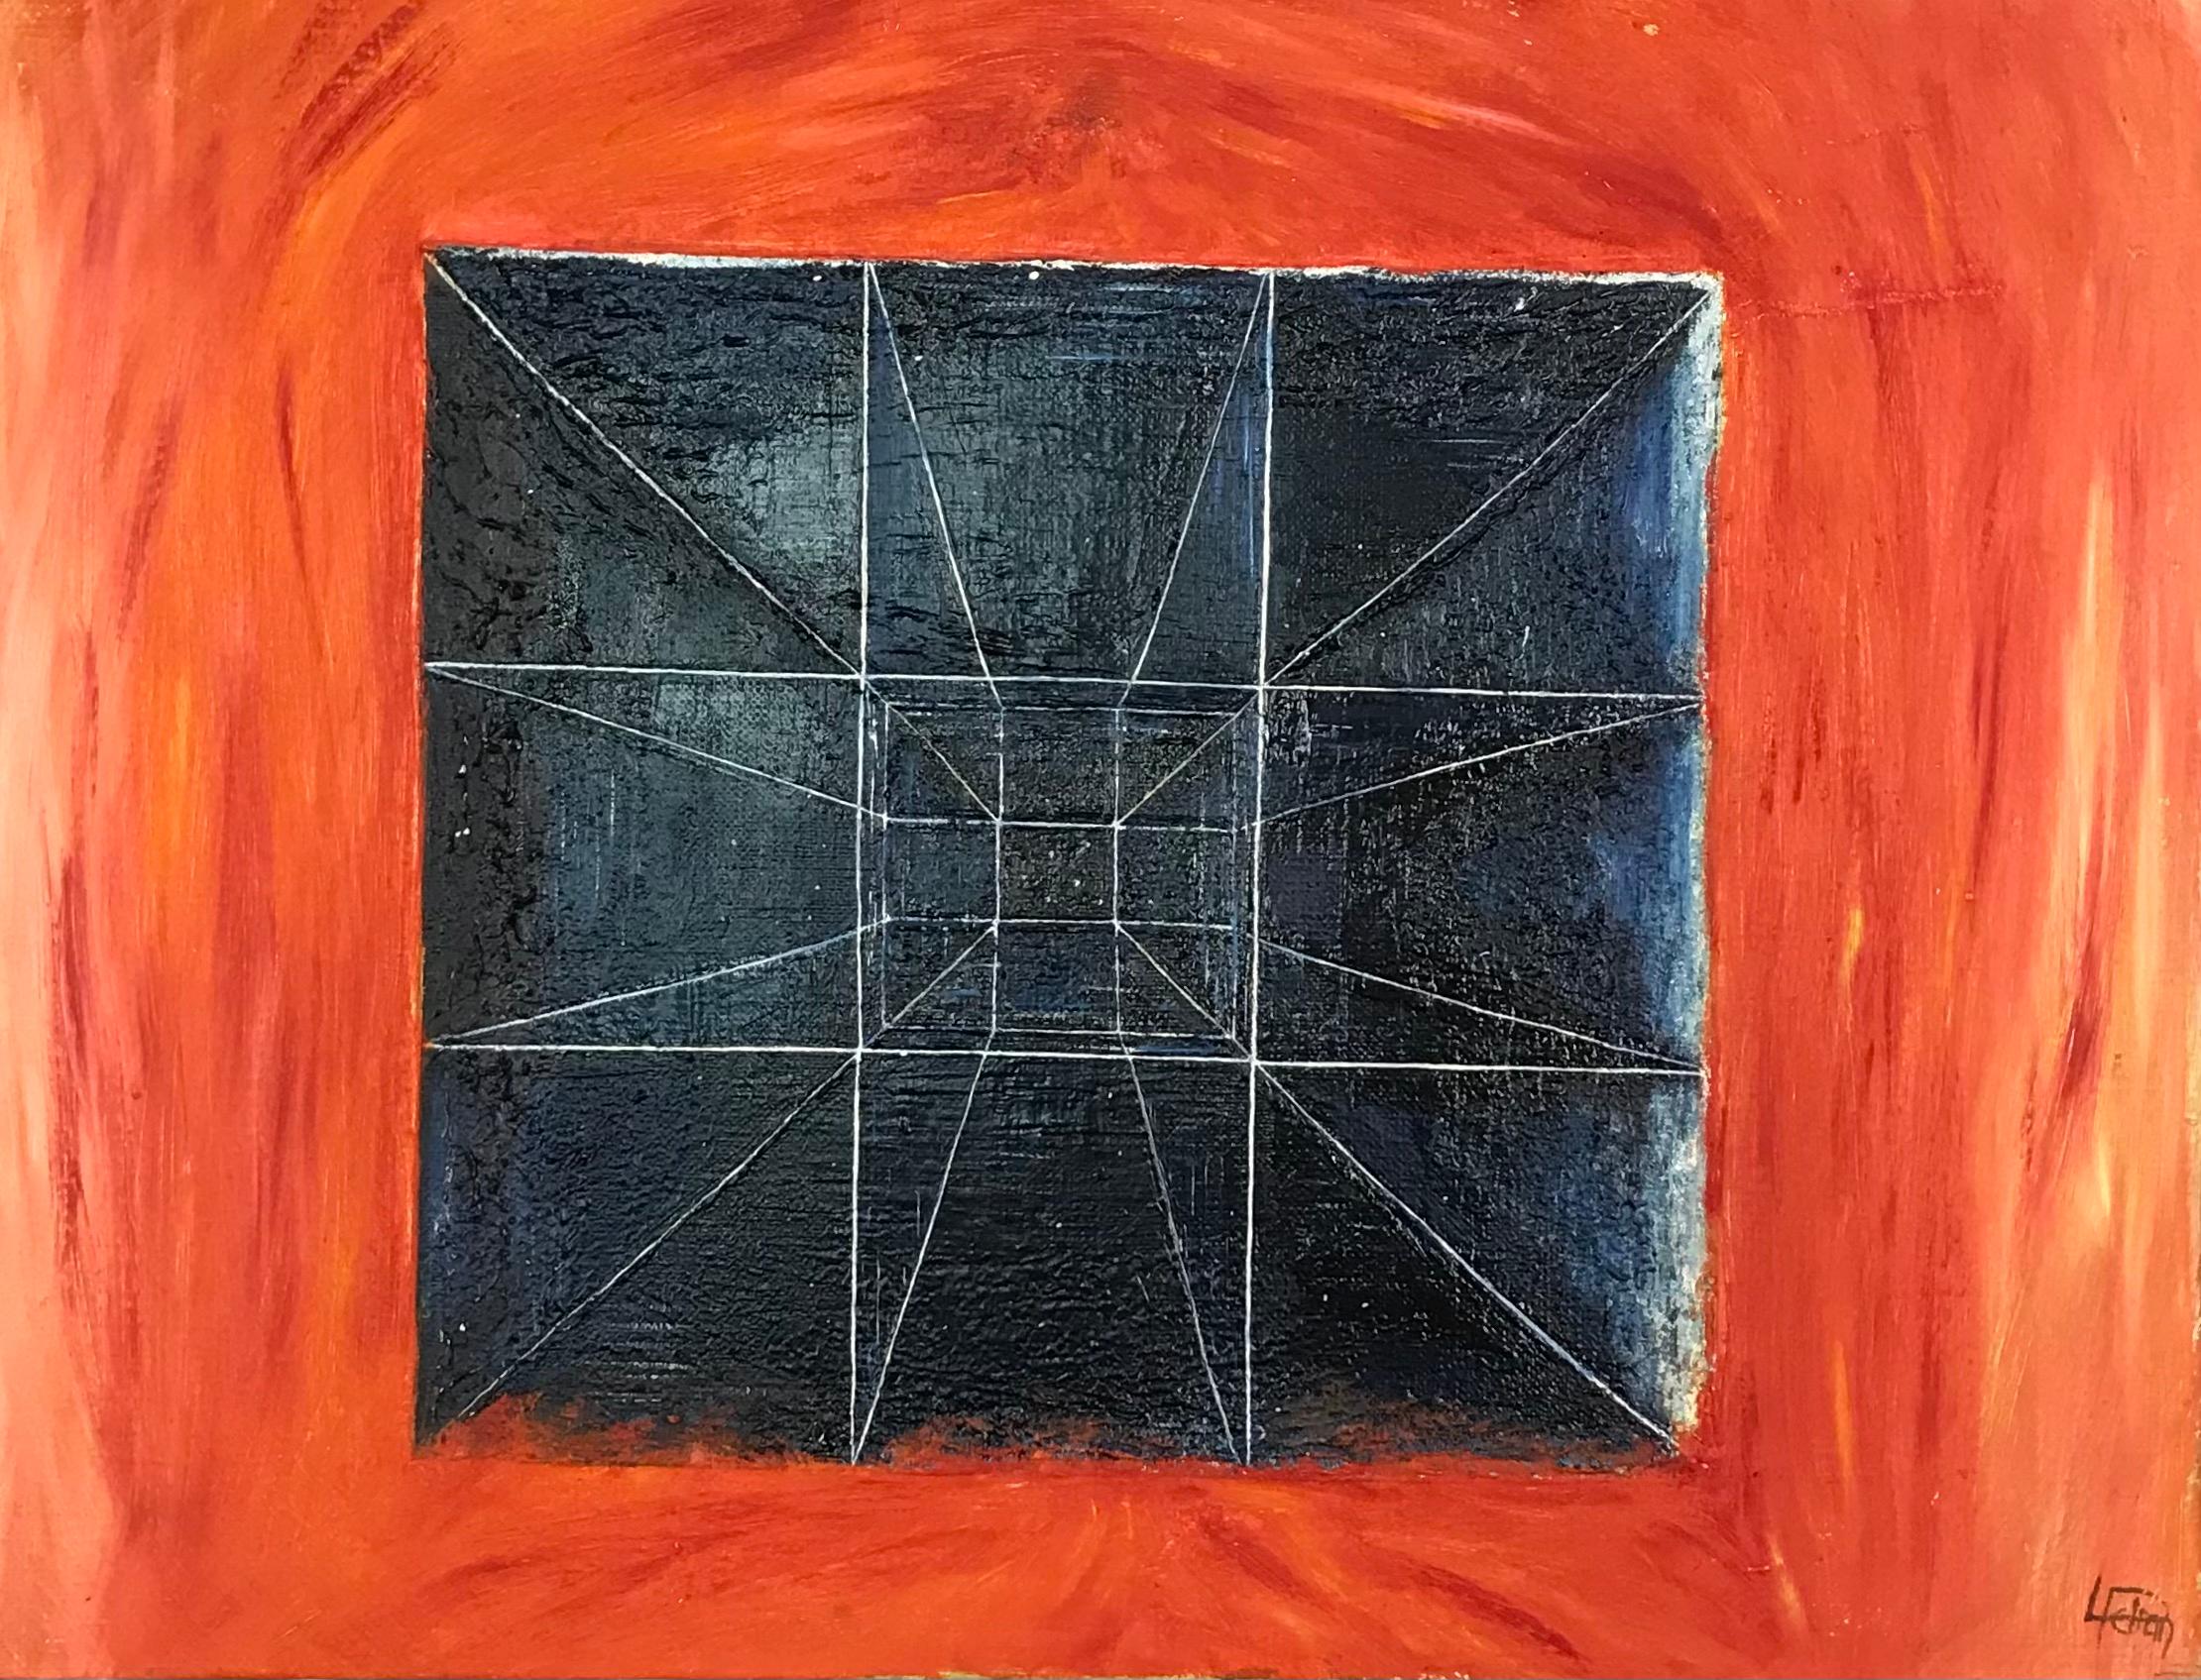 L.P. Dran Abstract Painting - Geometric composition by L.P Dean - Oil paint on paper and canvas